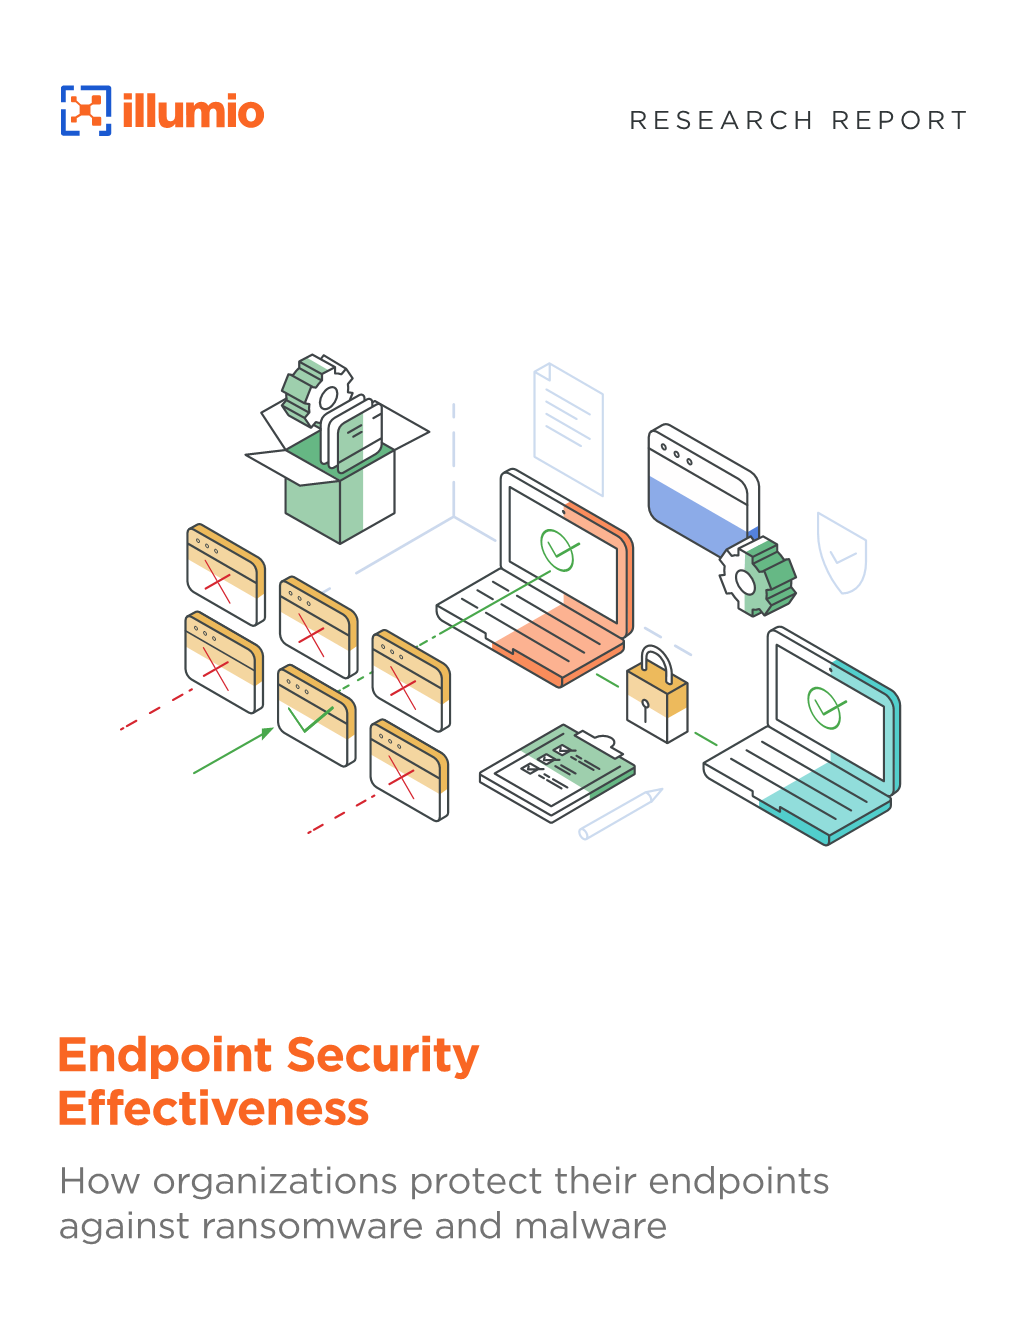 Endpoint Security Effectiveness How Organizations Protect Their Endpoints Against Ransomware and Malware RESEARCH REPORT